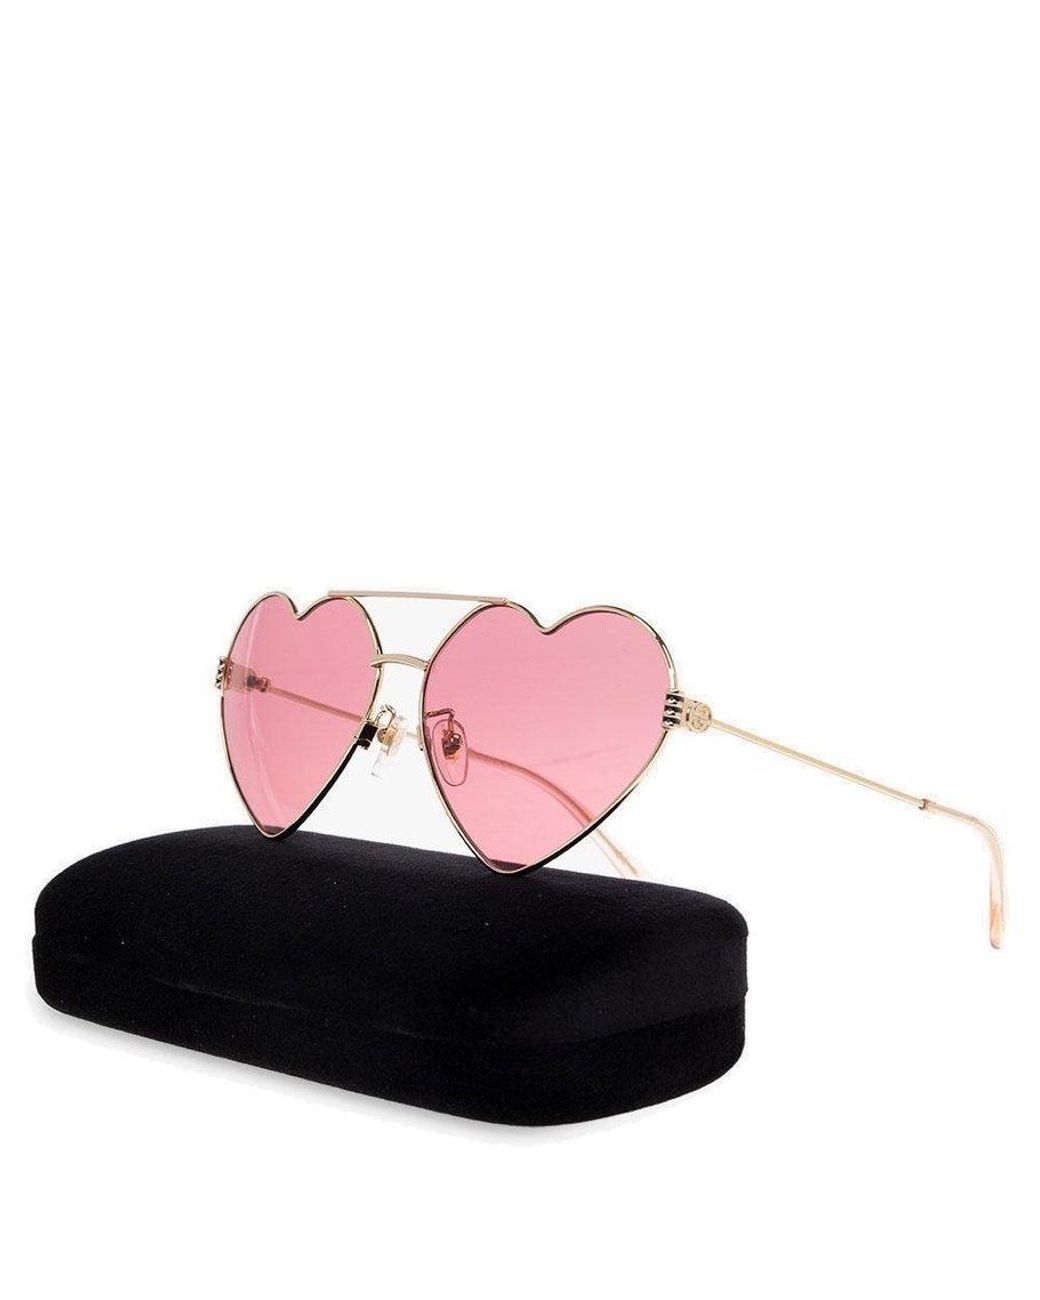 Gucci Heart Shaped Frame Sunglasses in Pink | Lyst